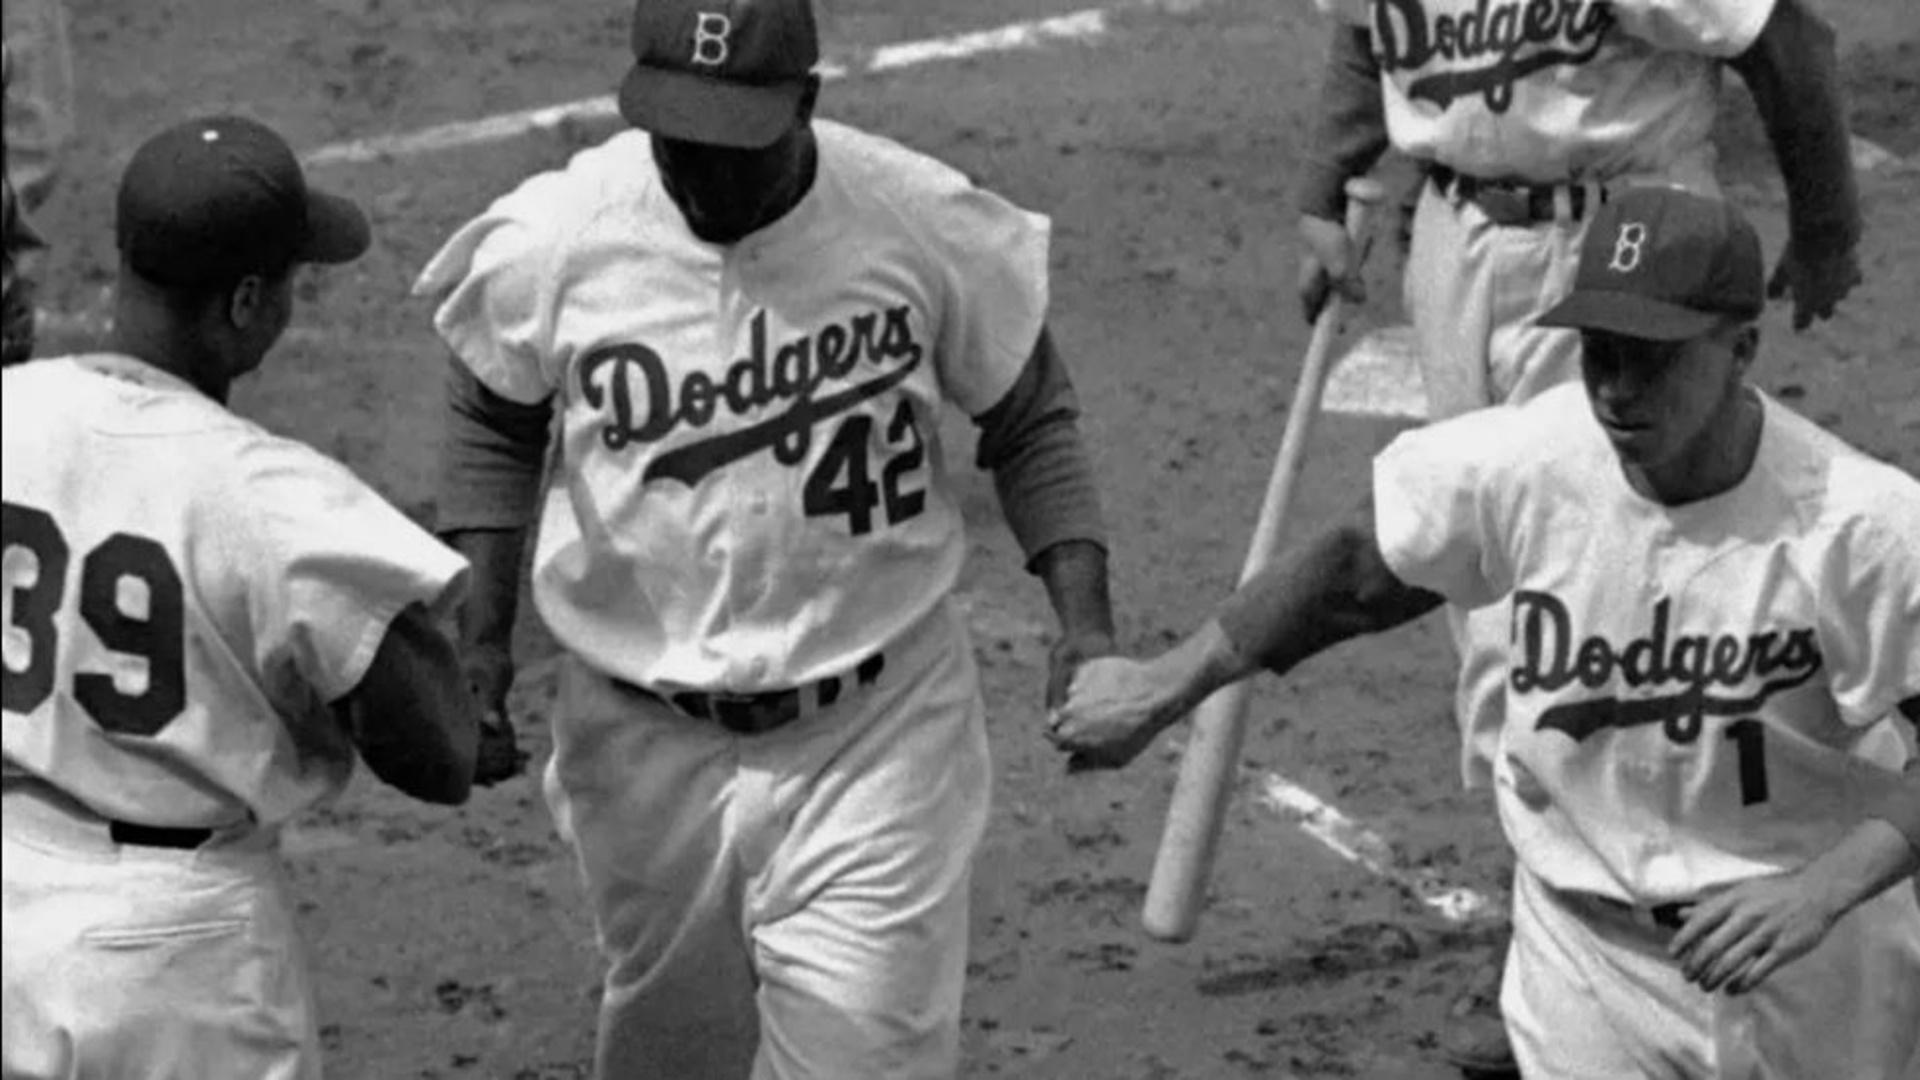 famous jackie robinson pee wee reese